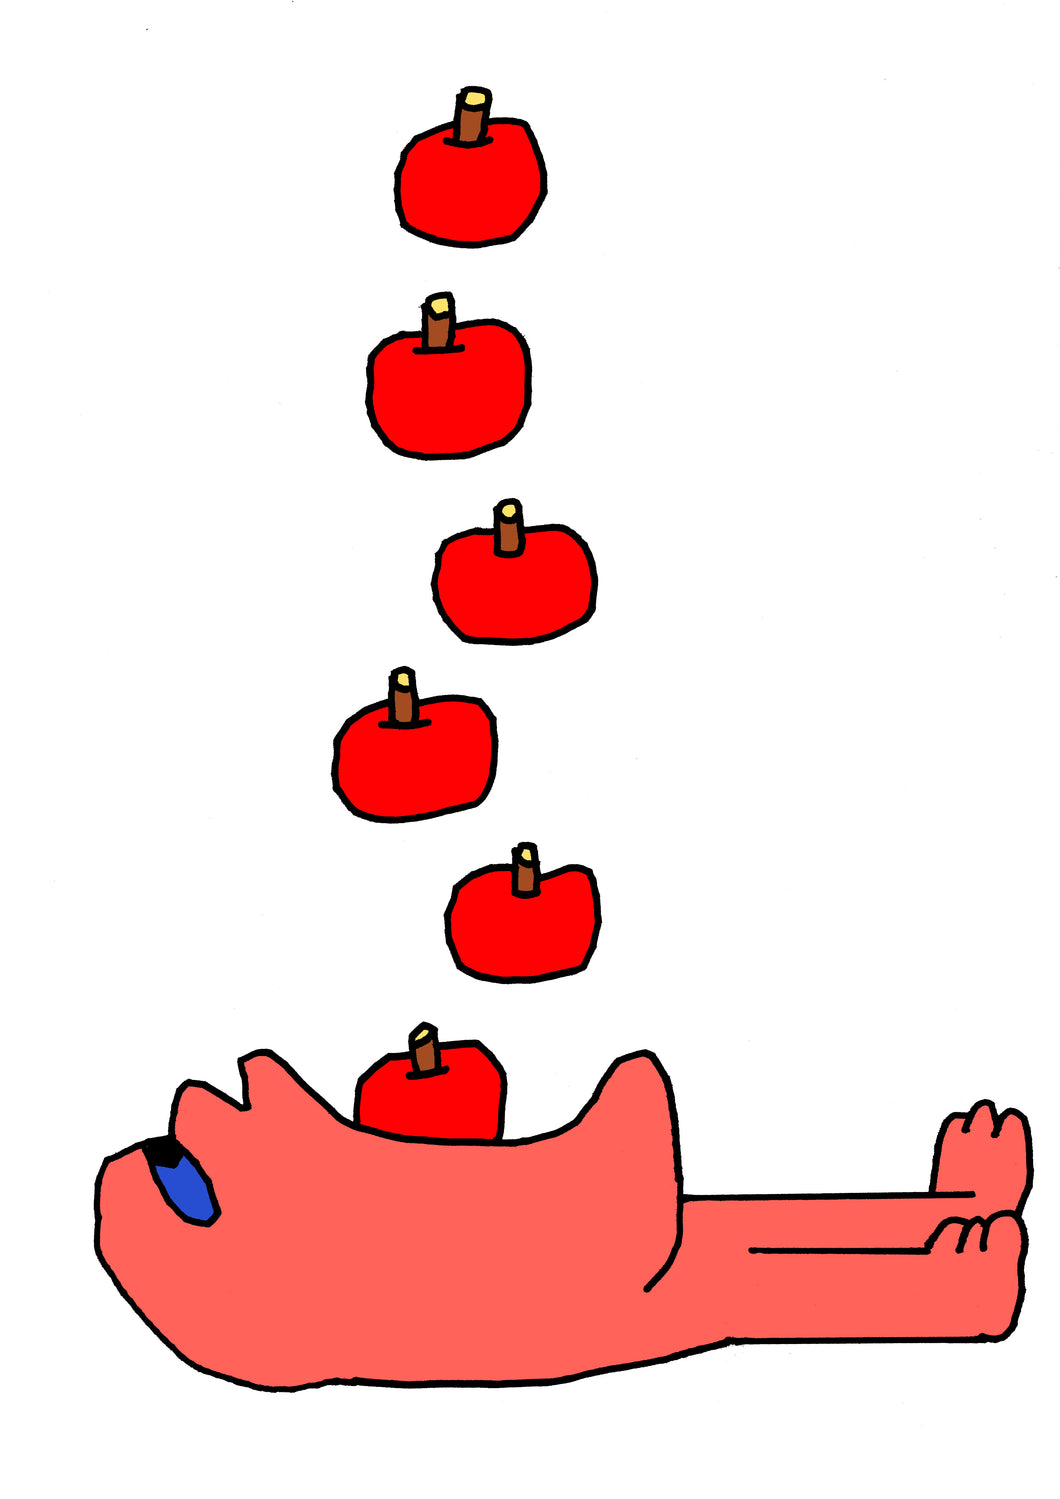 'EAT APPLES ON YOUR BACK SO THE DOCTOR STAYS AWAY' A3 PRINT